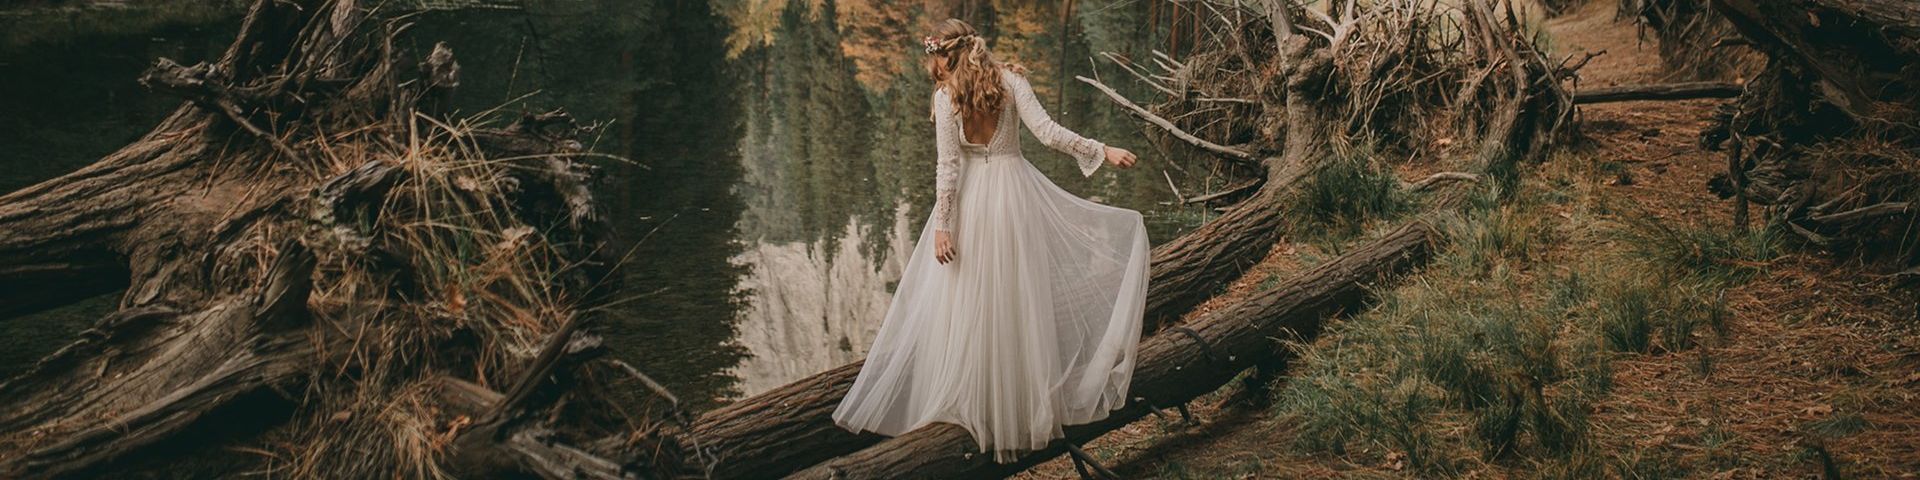 A women with long hair in her wedding dress is balancing on fallen trees on the edge of a give in a forest.